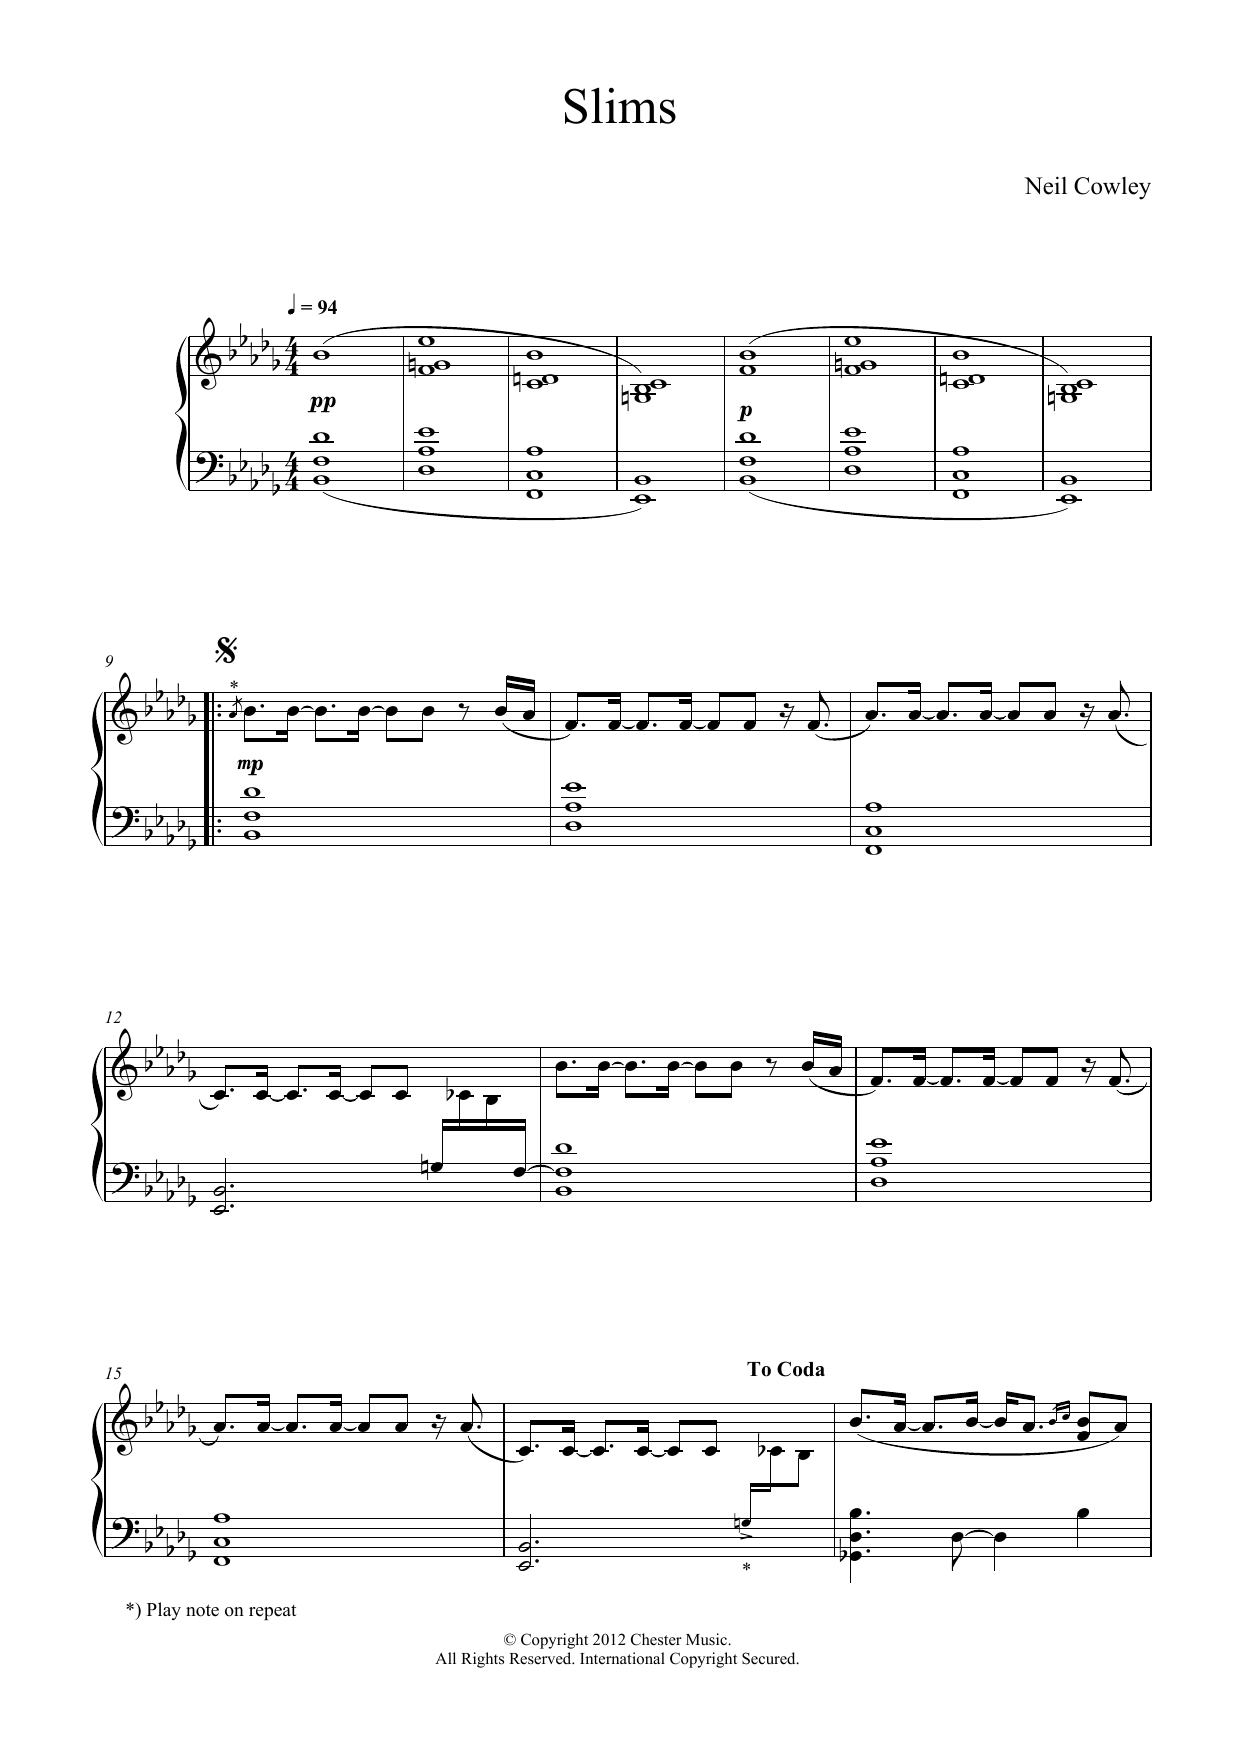 Download Neil Cowley Slims Sheet Music